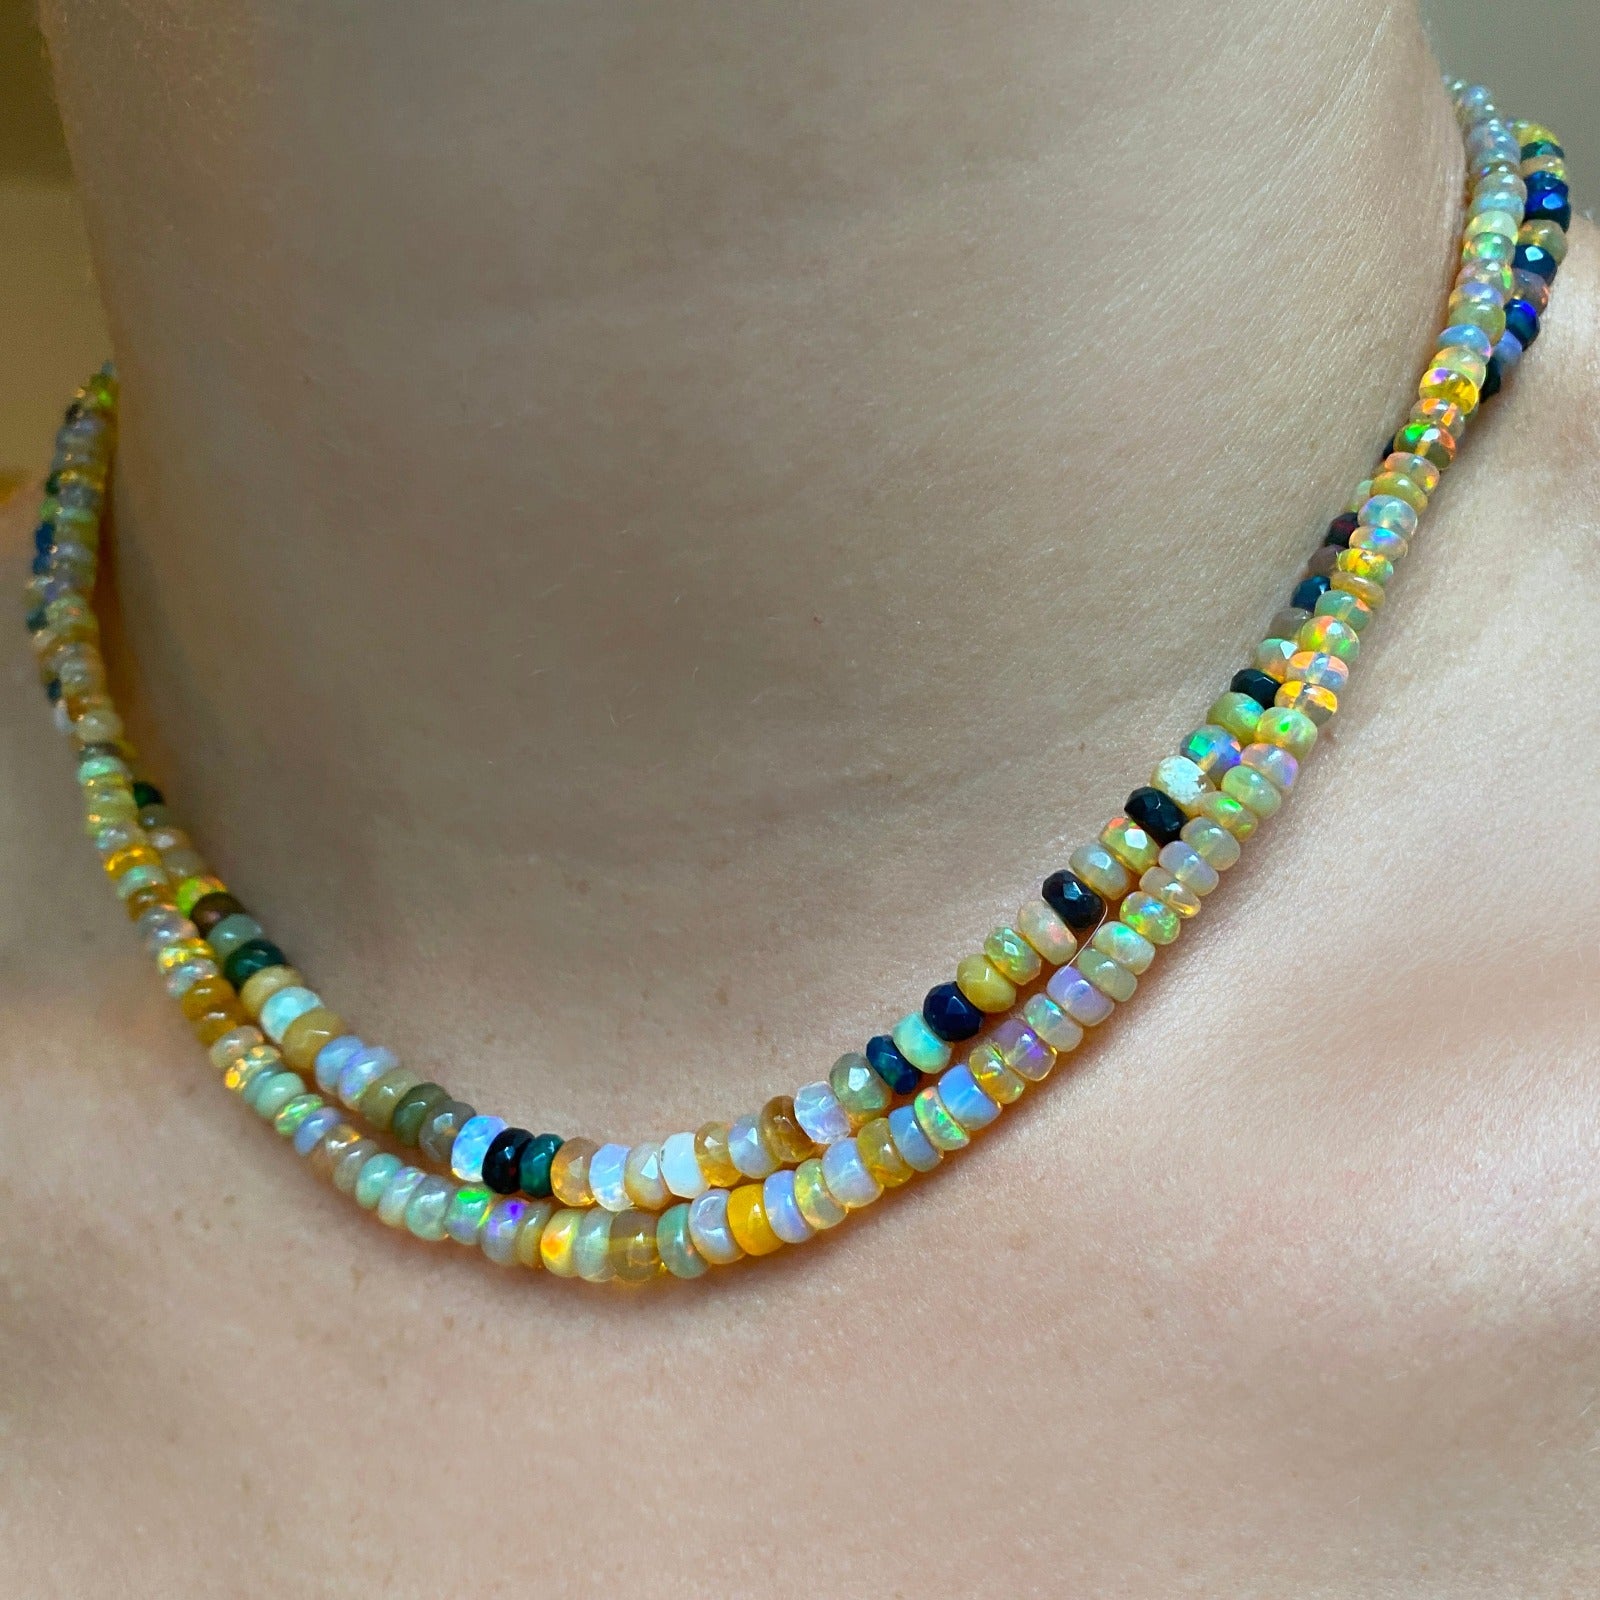  Shimmering beaded necklace made of faceted opals in shades of yellow, orange, and clear opals on a gold linking ovals clasp.